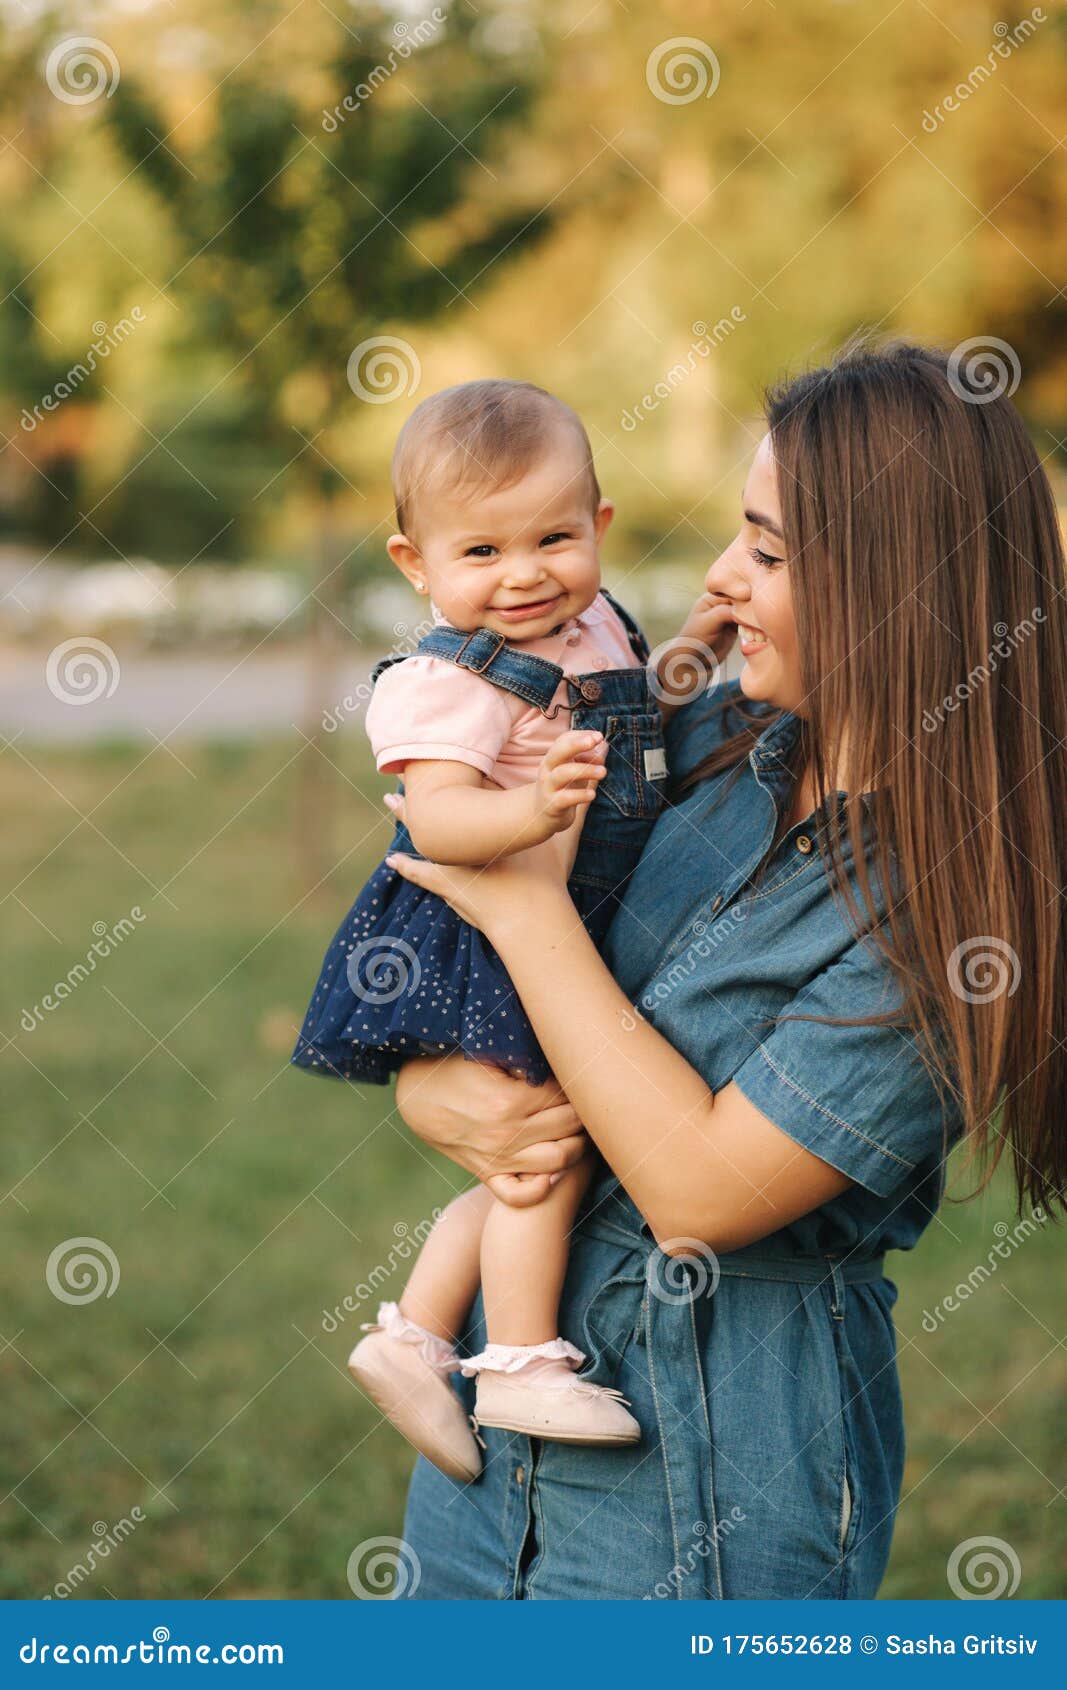 Cute Baby Girl Walking with Her Mom and Have Fun. Stylish Family ...